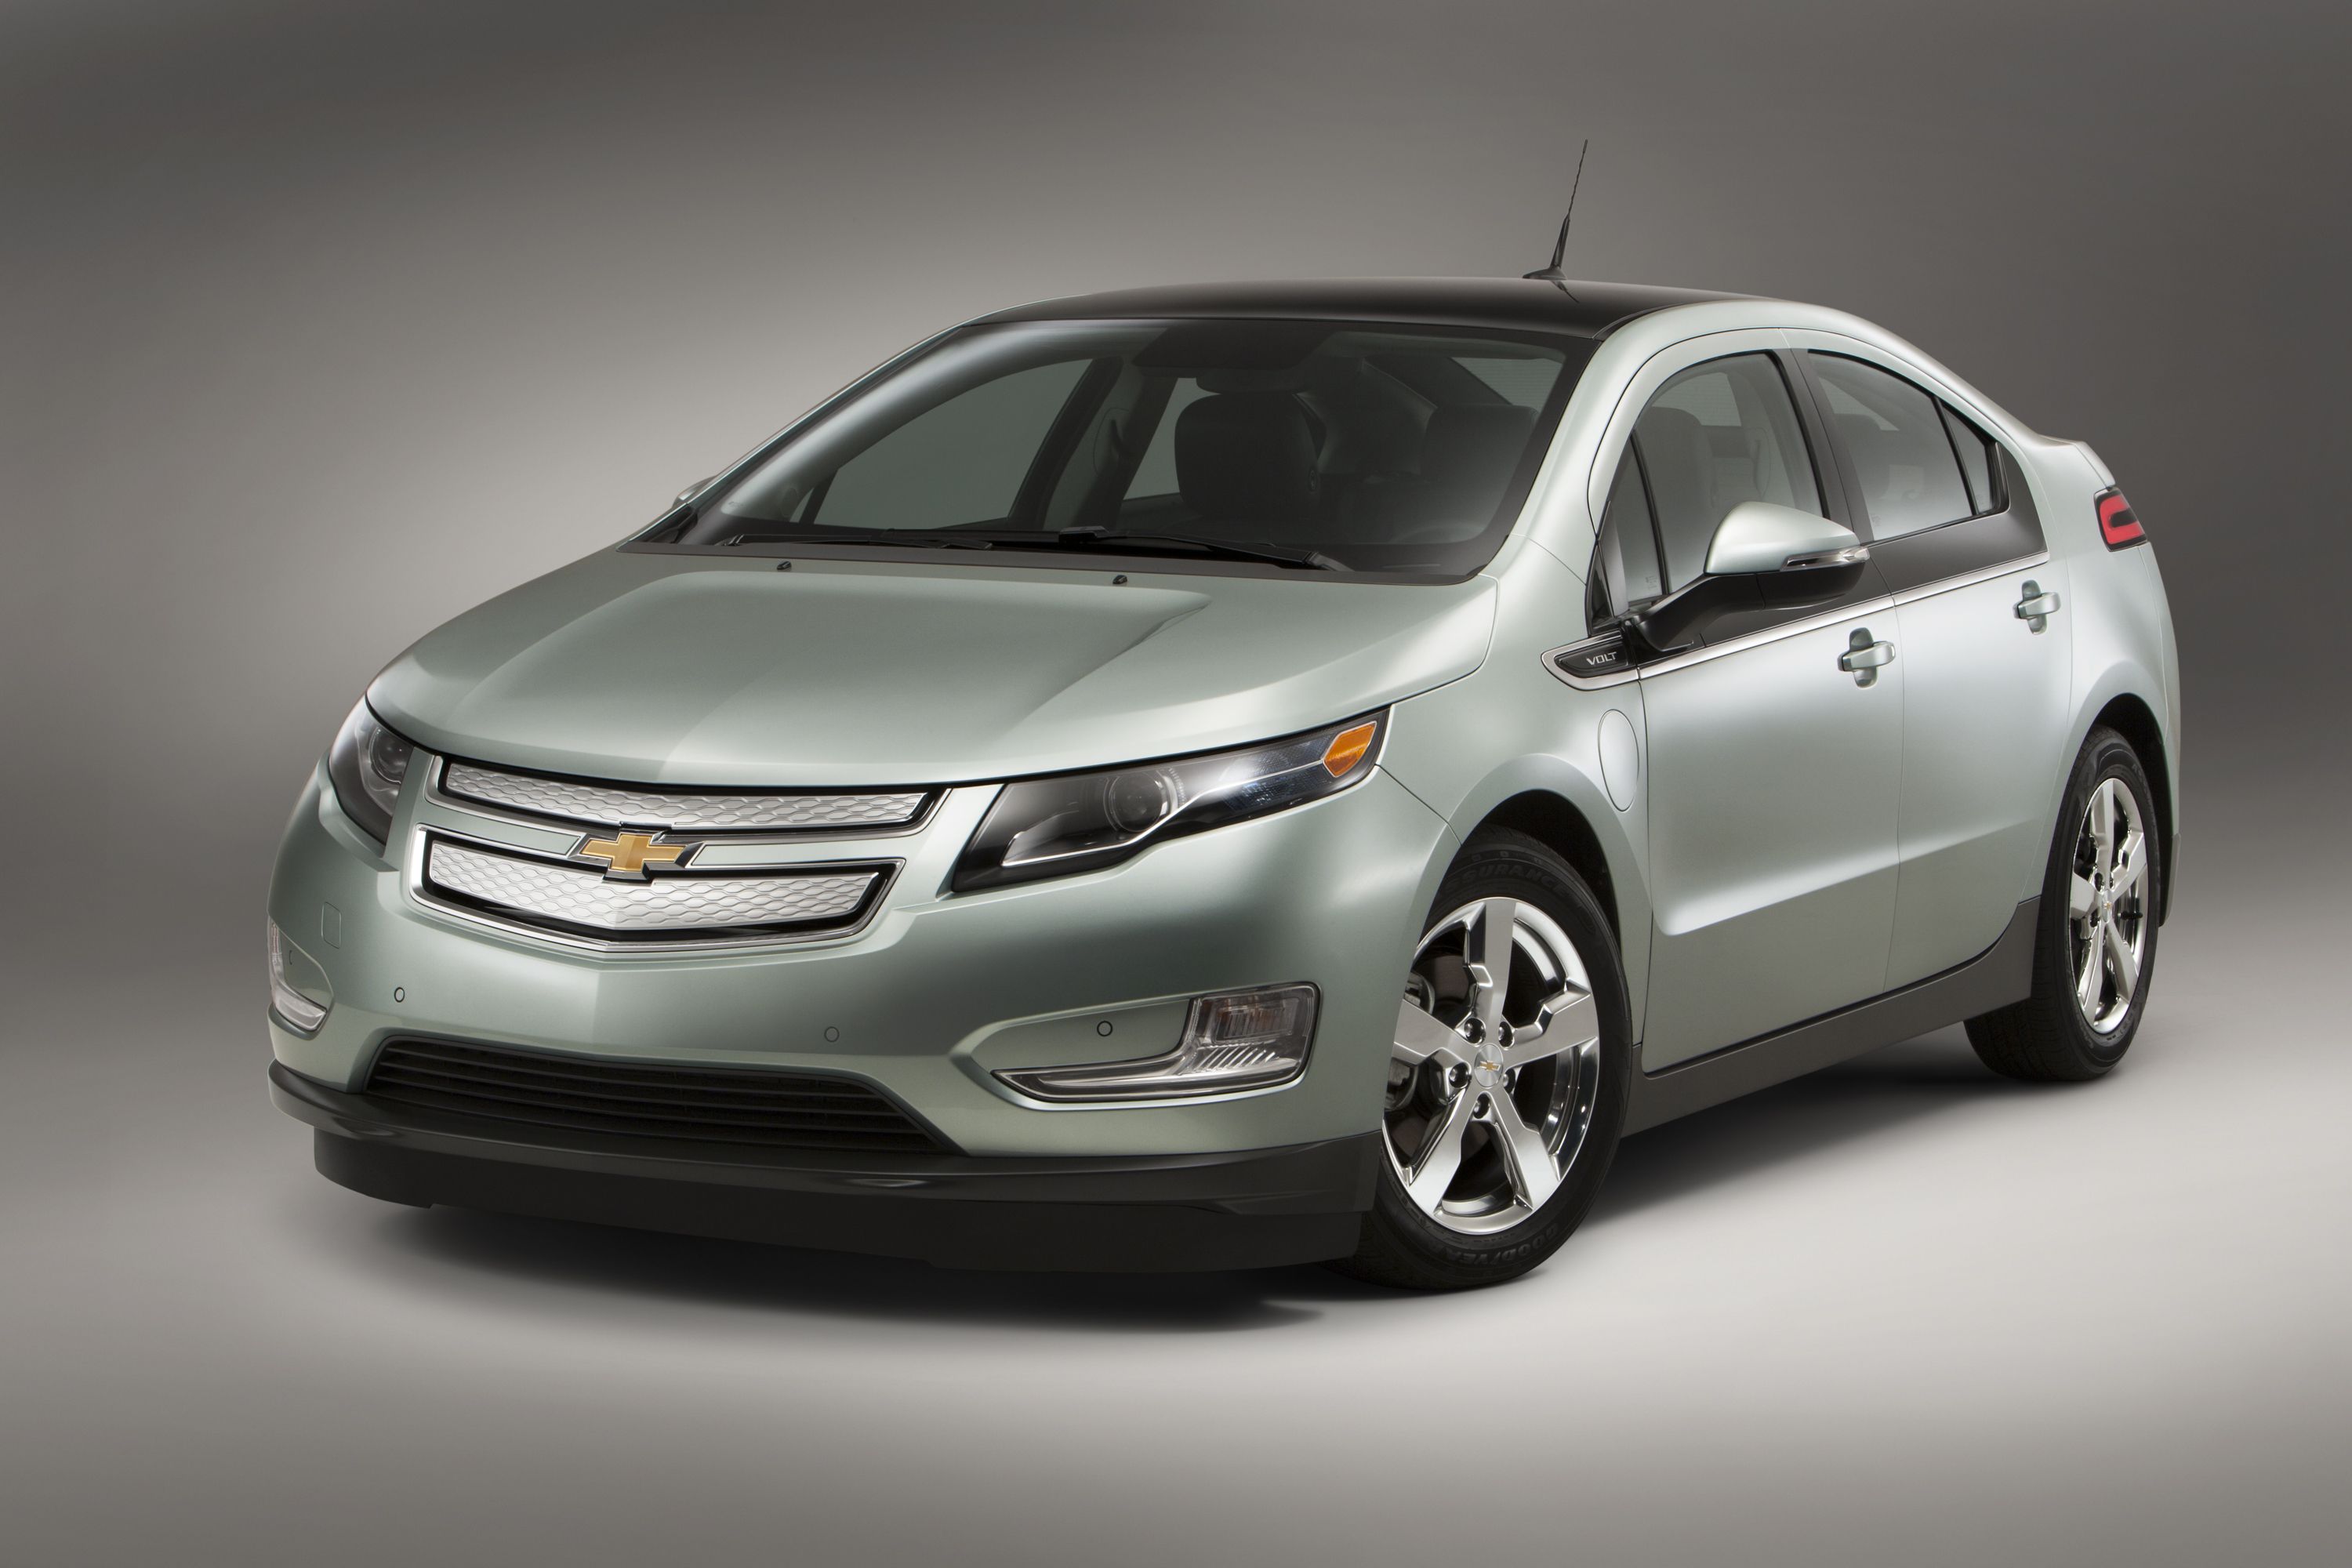 Ford edged Chevrolet in terms of overall brand awareness, but the Chevy Volt was king when it came to individual models.